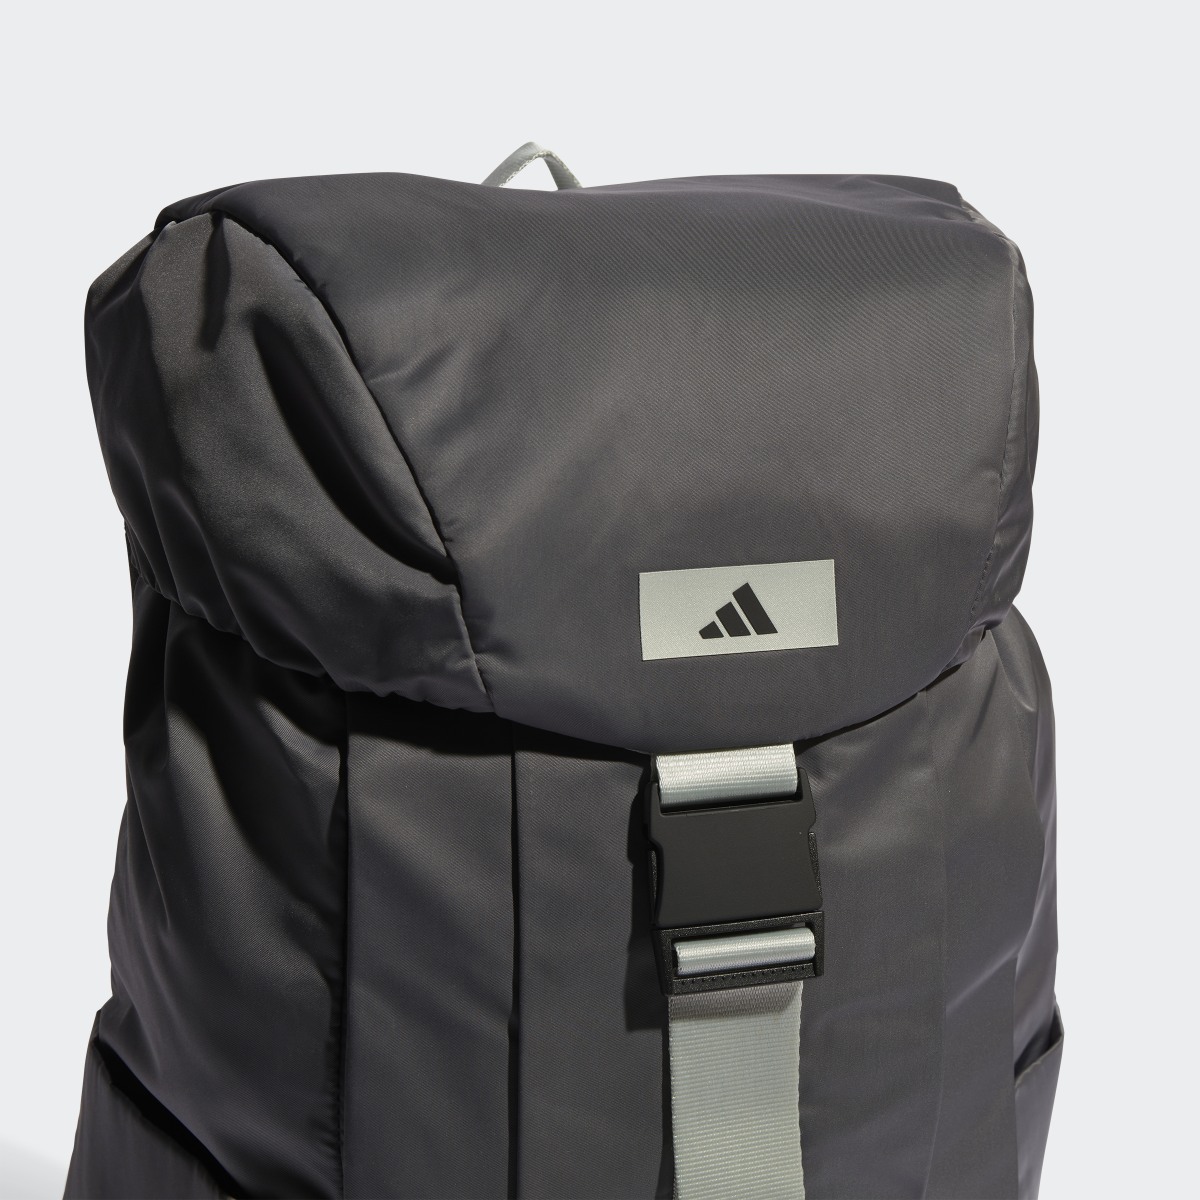 Adidas Gym High-Intensity Backpack. 6